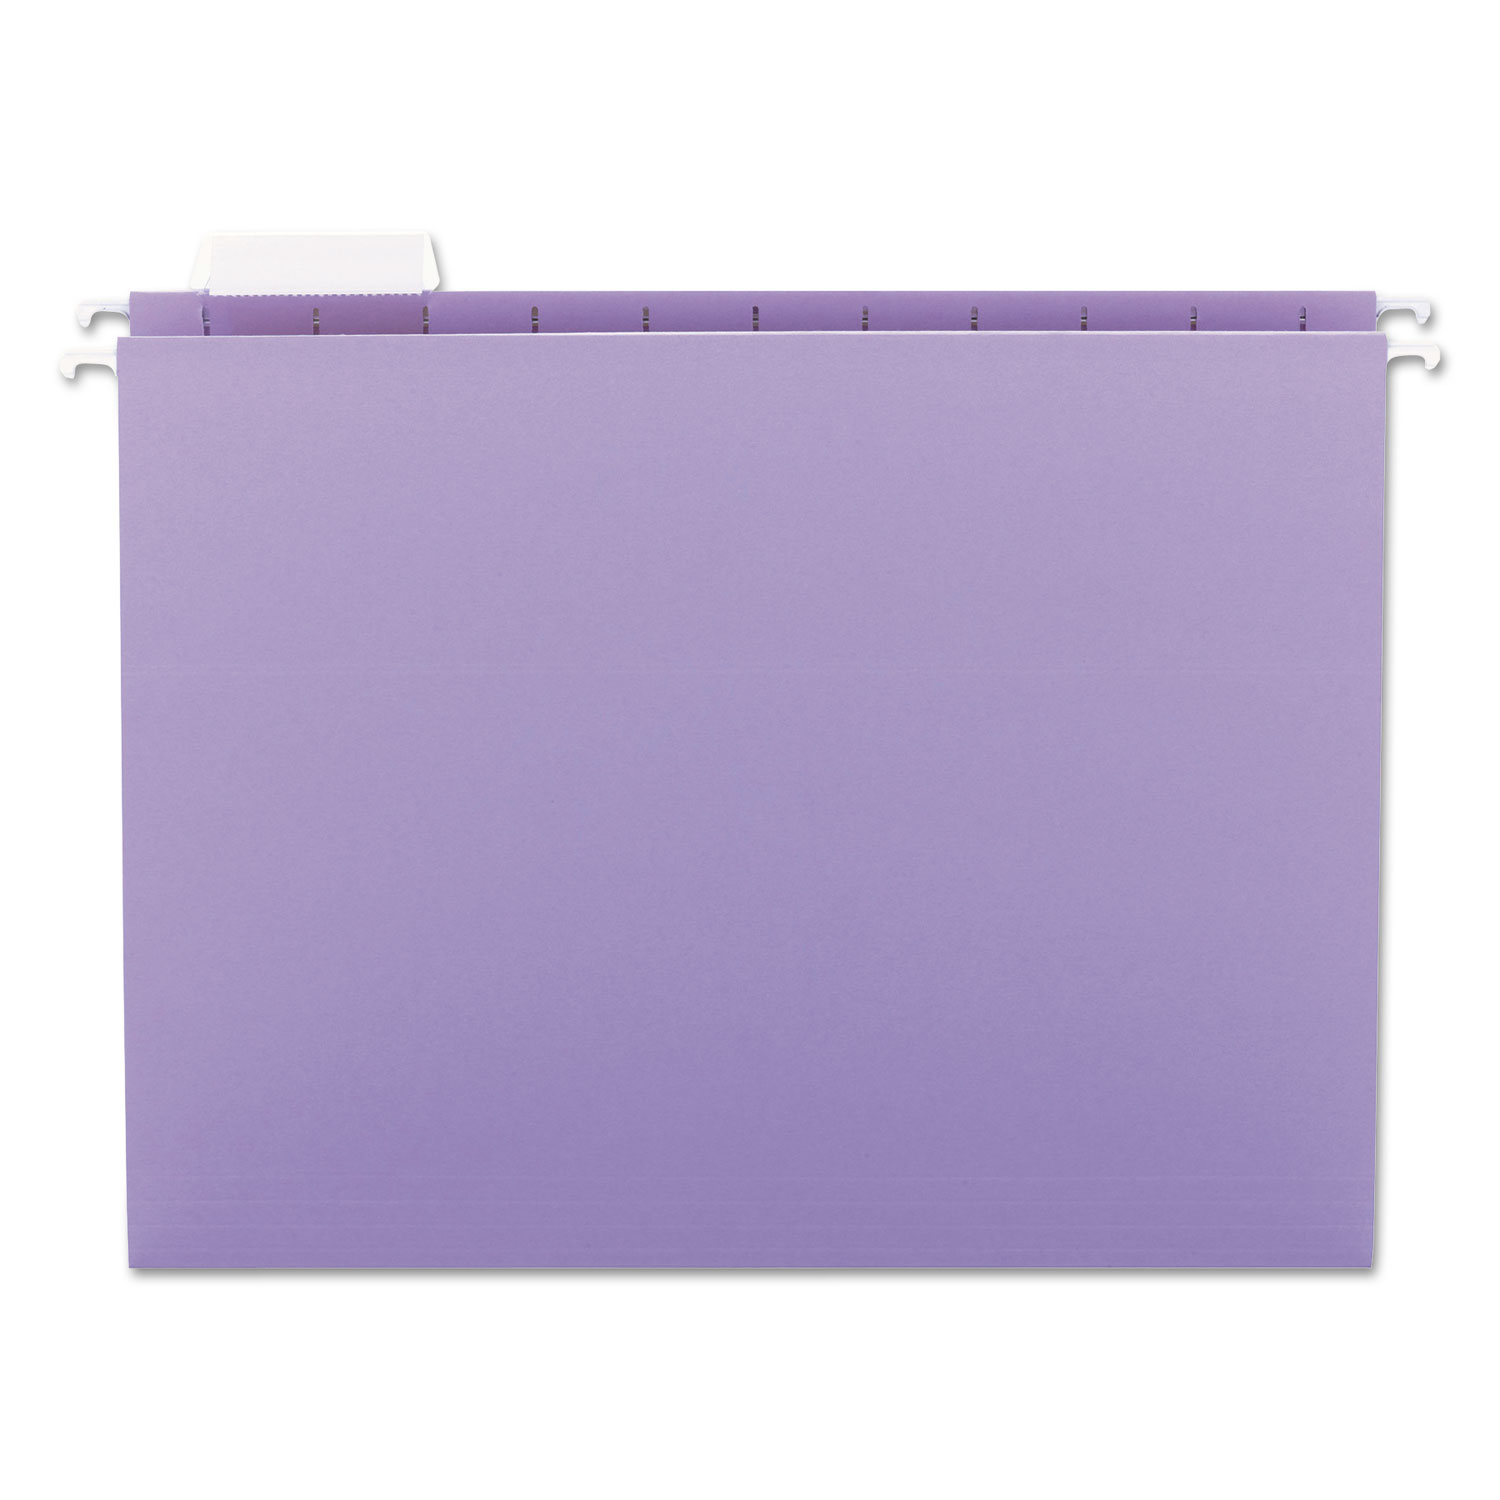  Smead 64064 Colored Hanging File Folders, Letter Size, 1/5-Cut Tab, Lavender, 25/Box (SMD64064) 